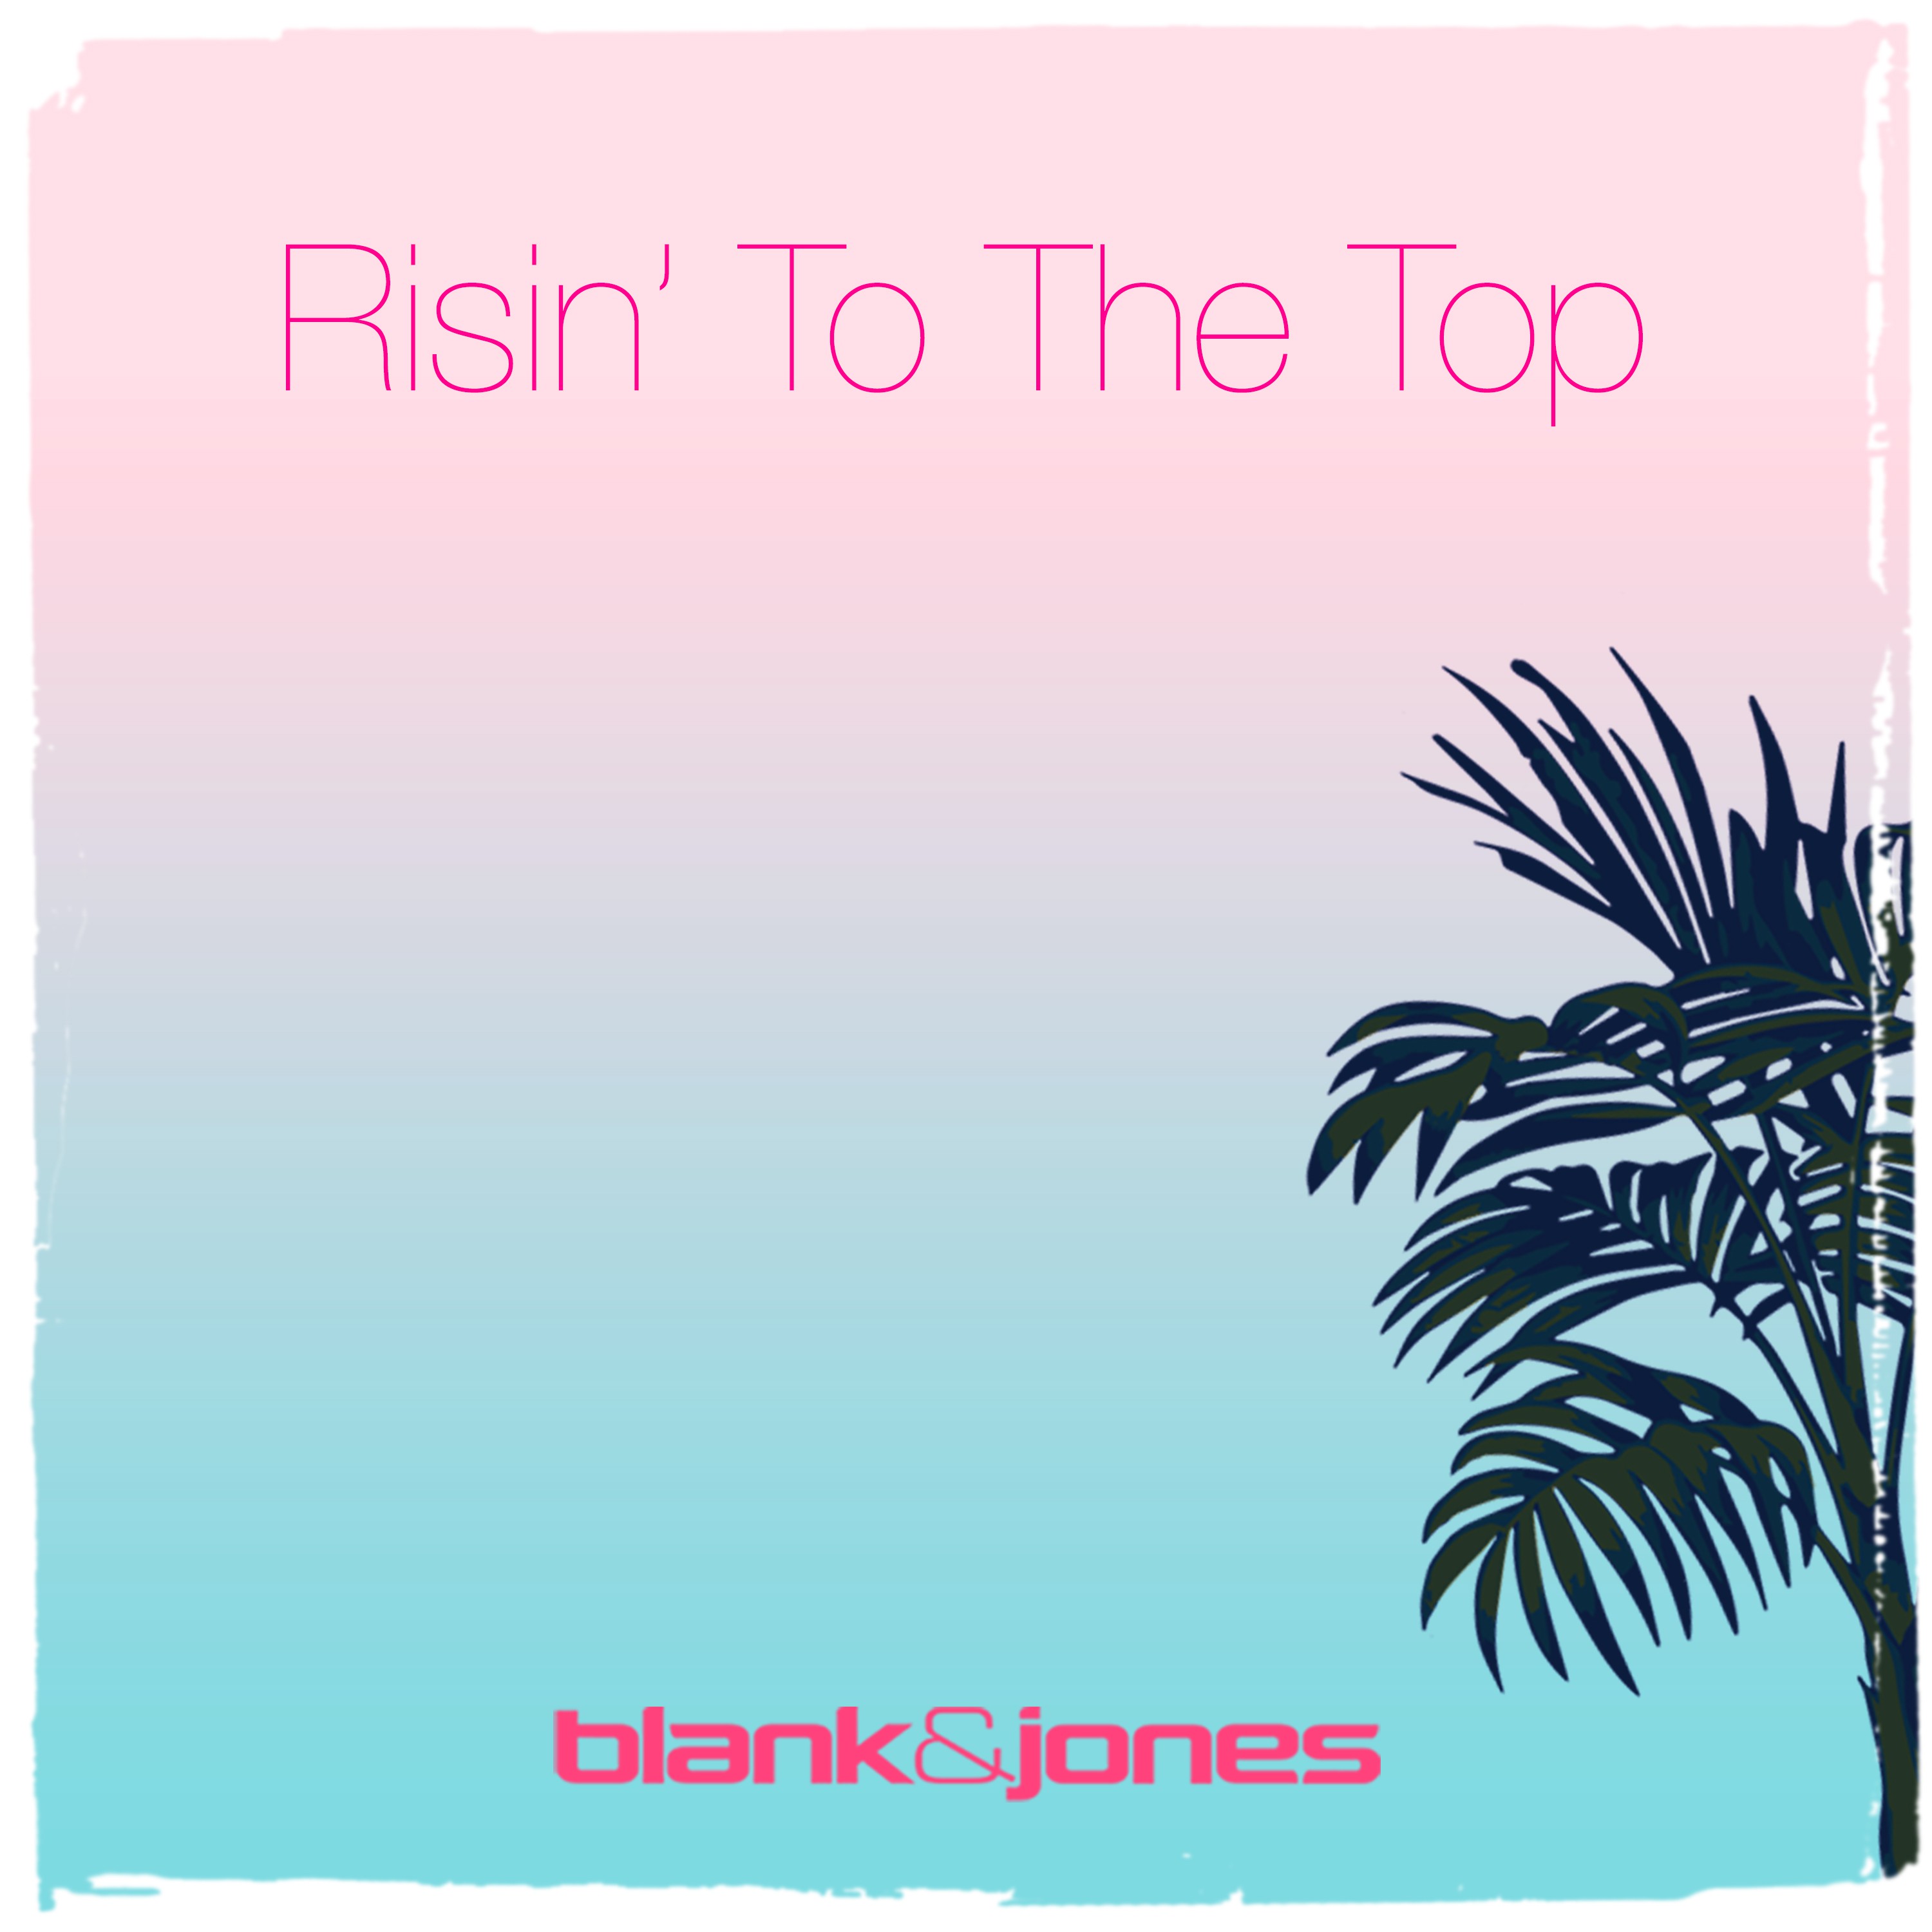 Risin' to the Top (Radio Mix)